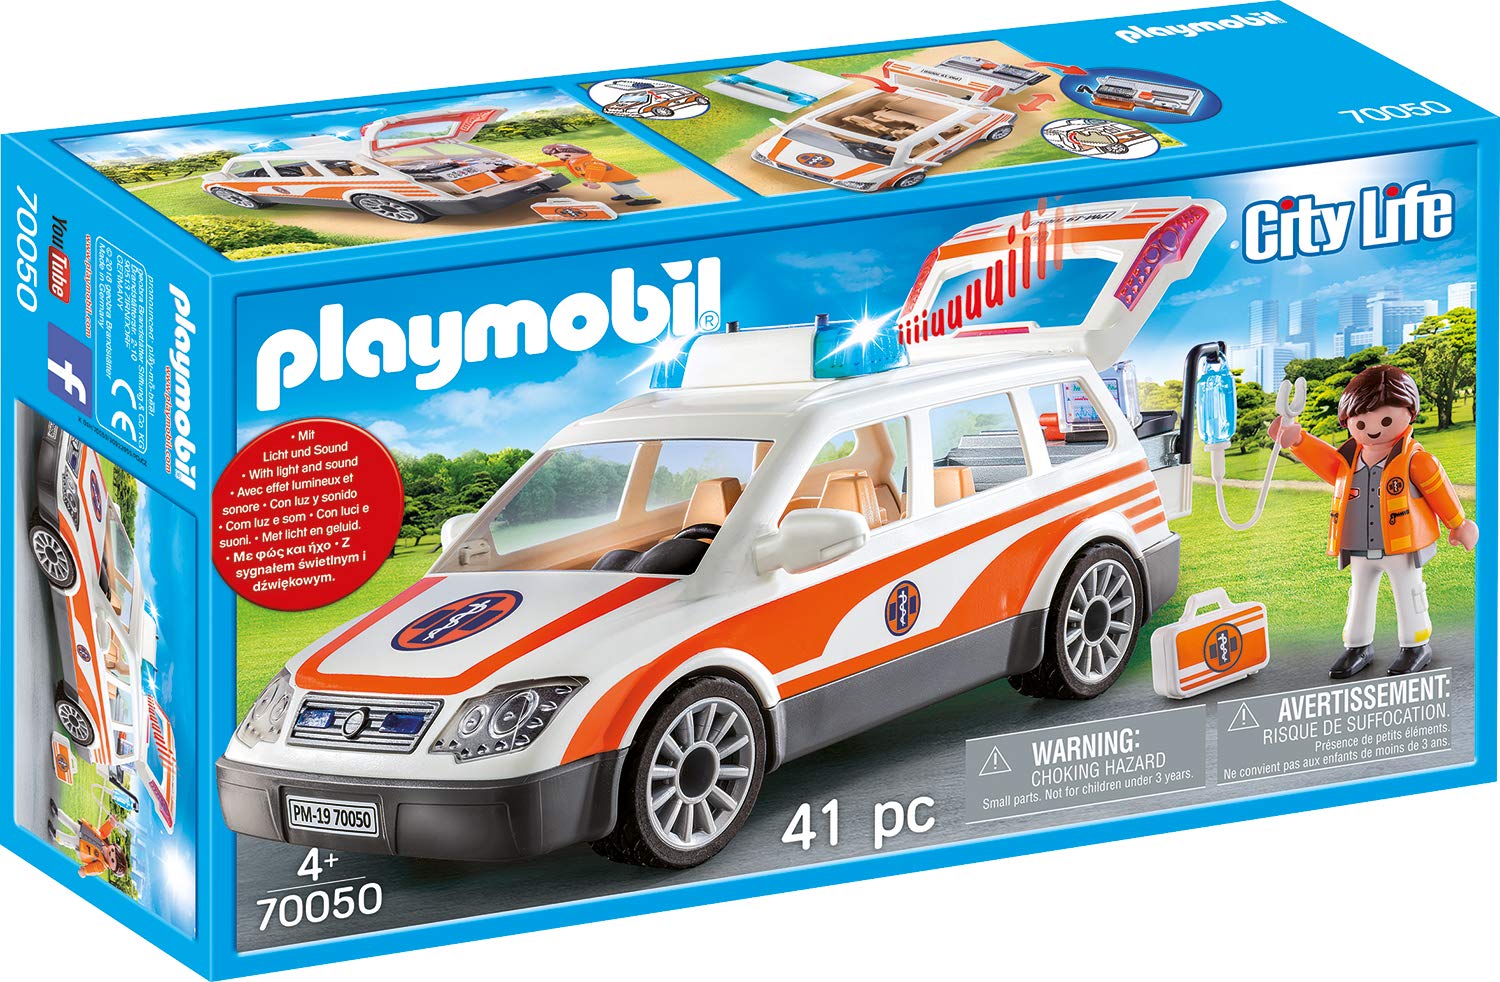 Playmobil City Life 70050 Emergency Car with Light and Sound Multi-Coloured